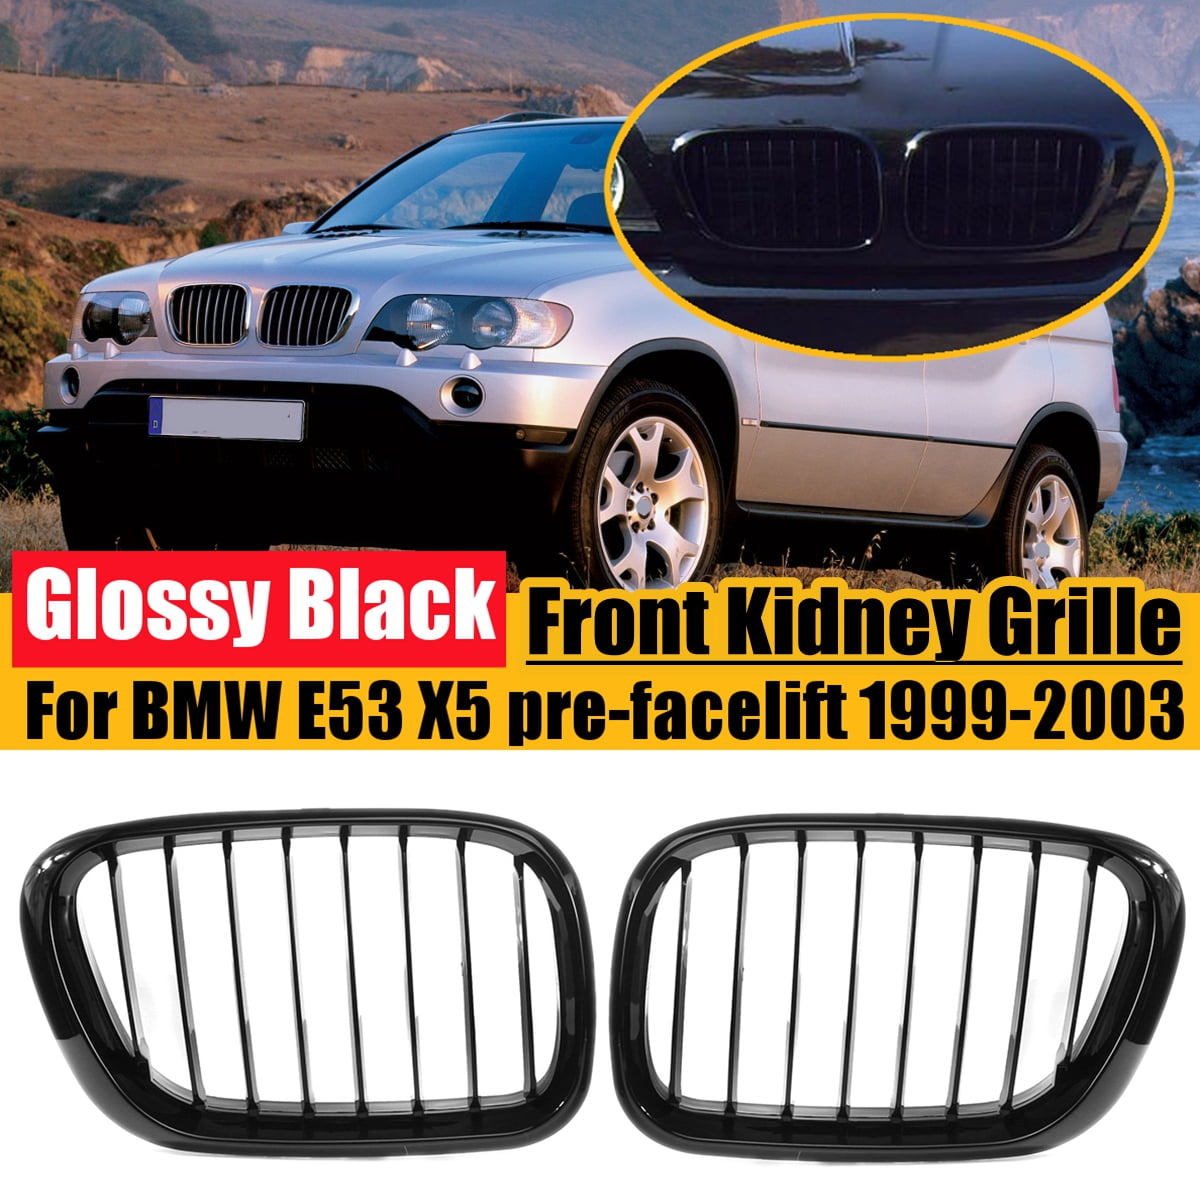 2x Matte Black Front Hood Kidney Grille Grill Cover for 2000-2003 BMW E53 X5 